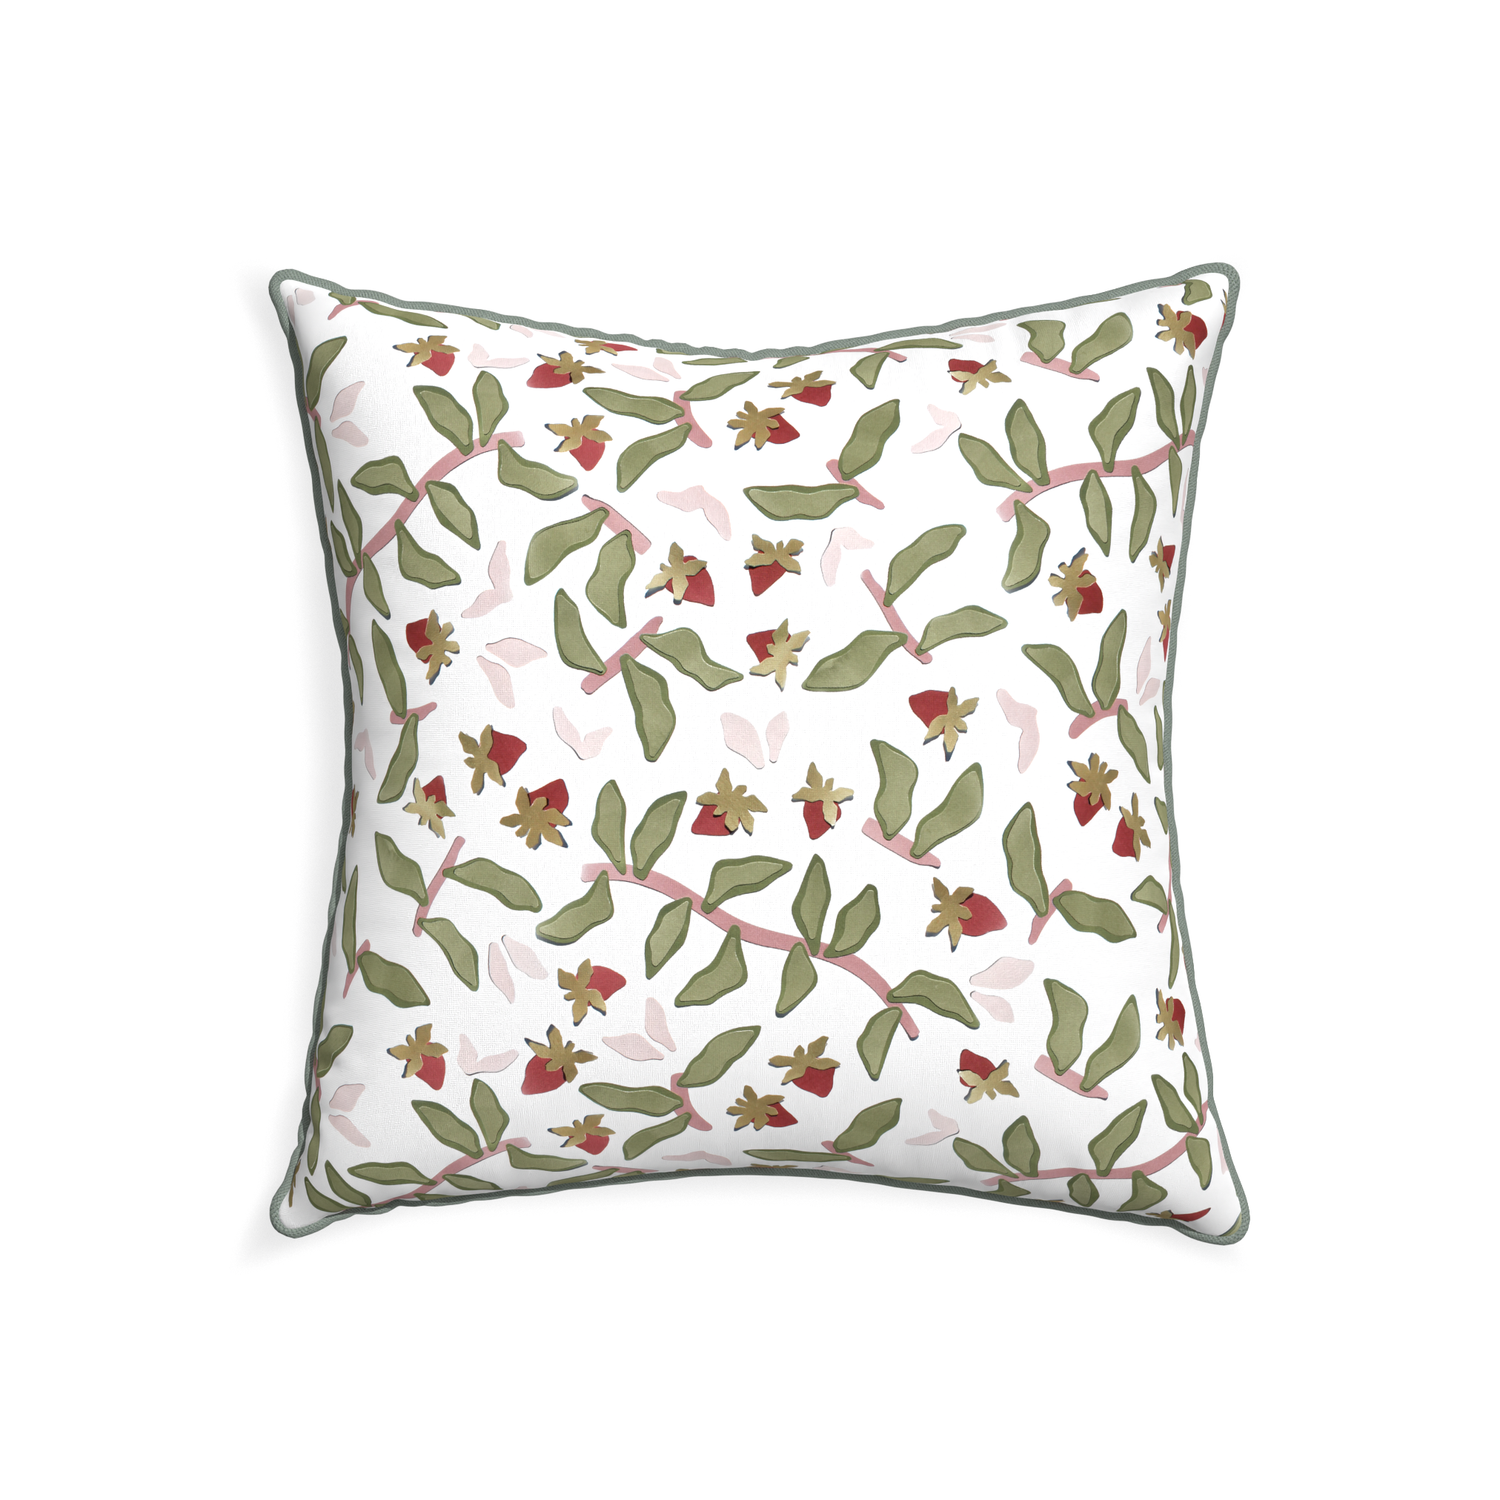 22-square nellie custom strawberry & botanicalpillow with sage piping on white background